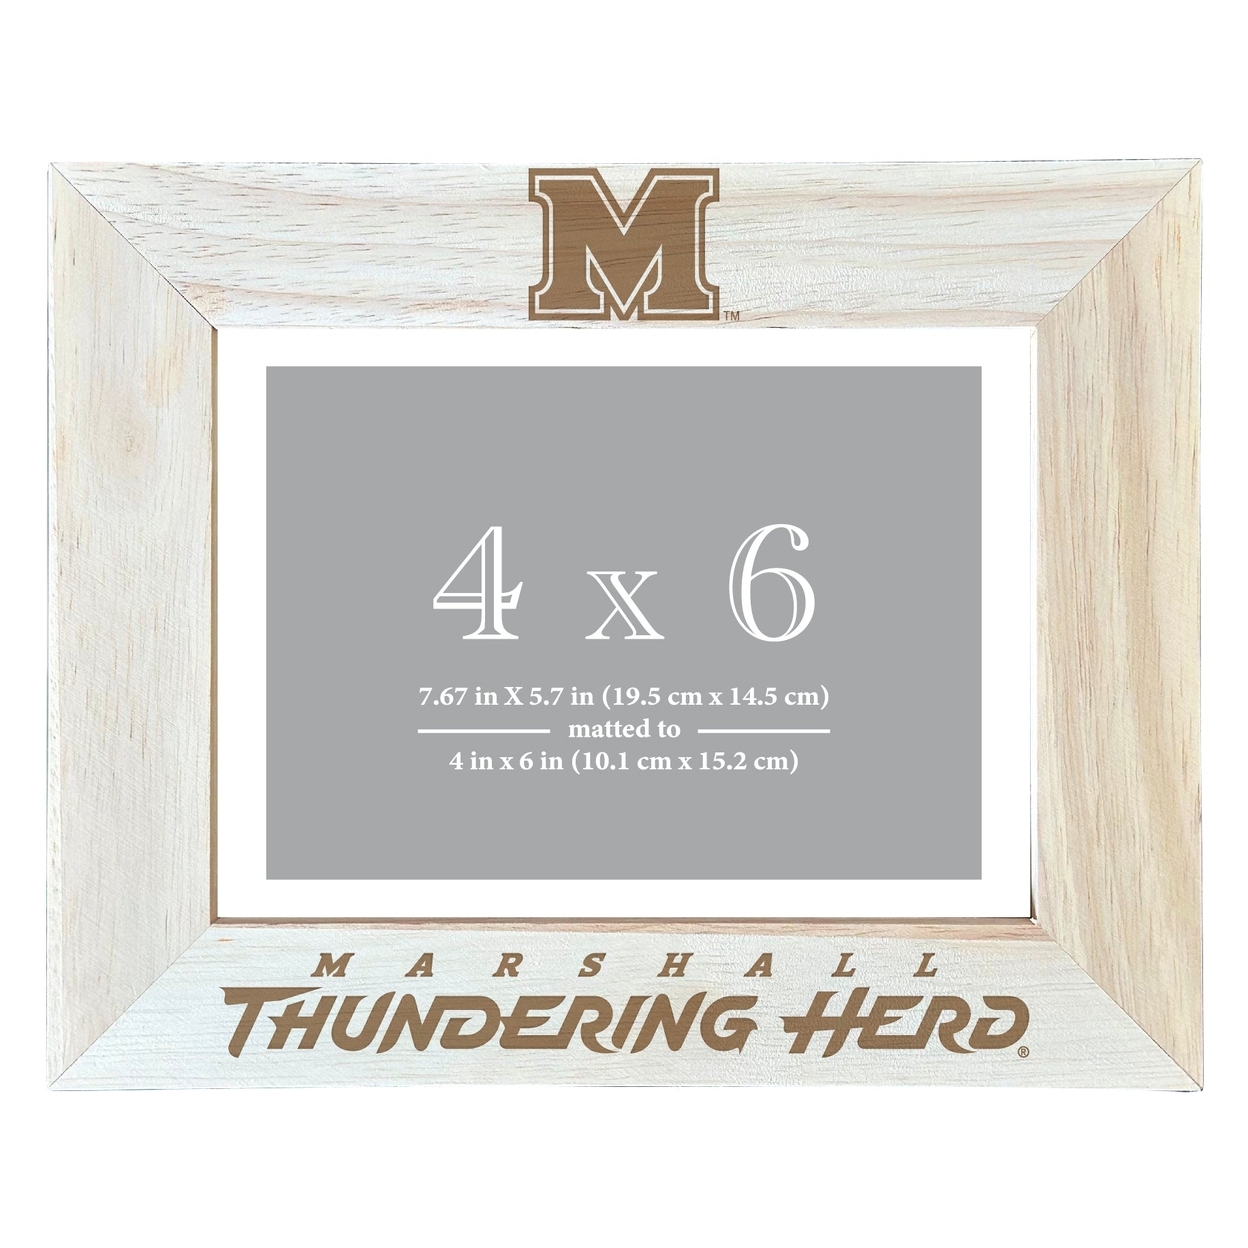 Marshall Thundering Herd Wooden Photo Frame Matted To 4 X 6 Inch - Etched